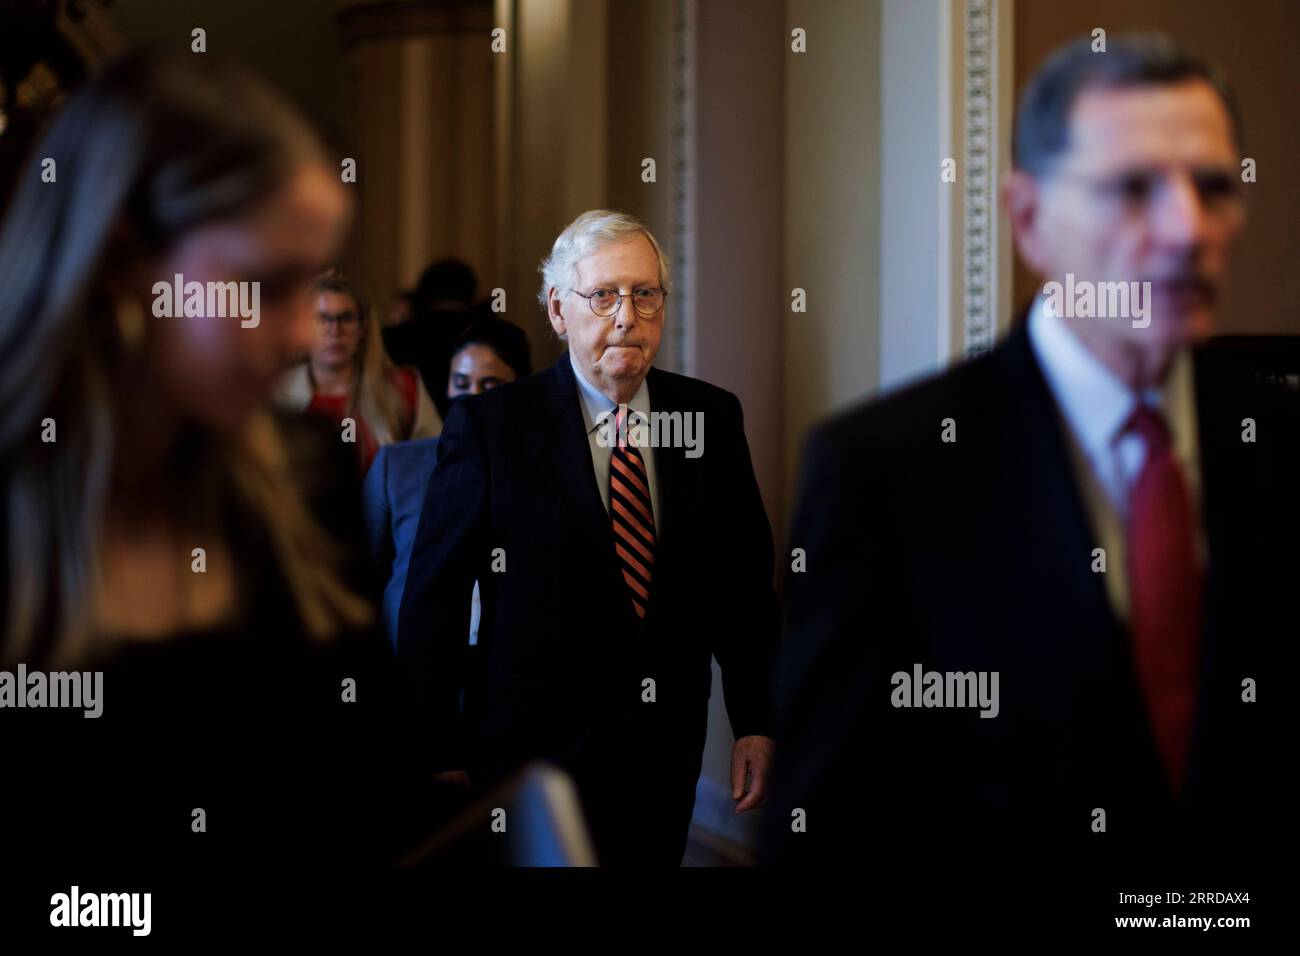 211215 -- WASHINGTON, D.C., Dec. 15, 2021 -- U.S. Senate Minority Leader Mitch McConnell is seen on Capitol Hill in Washington, D.C. Dec. 14, 2021. The U.S. Senate on Tuesday approved a measure to lift the nation s borrowing limit by 2.5 trillion U.S. dollars, one day before the deadline set by Treasury Secretary Janet Yellen for lawmakers to take action to prevent a default. Photo by /Xinhua U.S.-WASHINGTON, D.C.-DEBT CEILING TingxShen PUBLICATIONxNOTxINxCHN Stock Photo